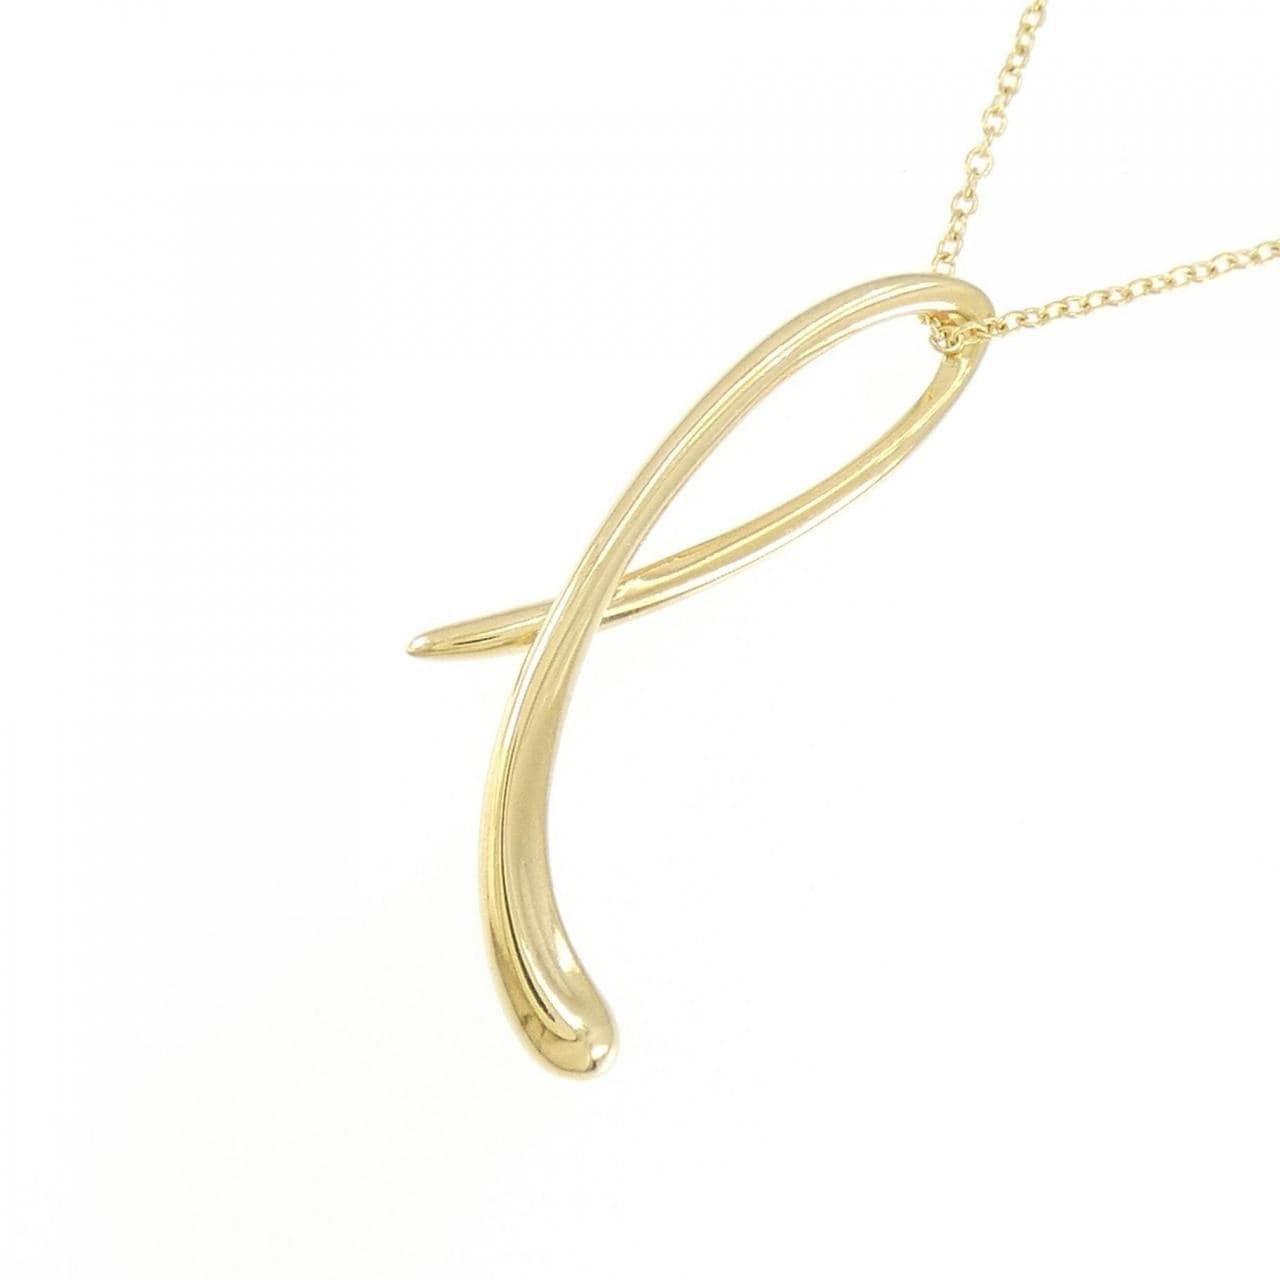 TIFFANY YG letter necklace